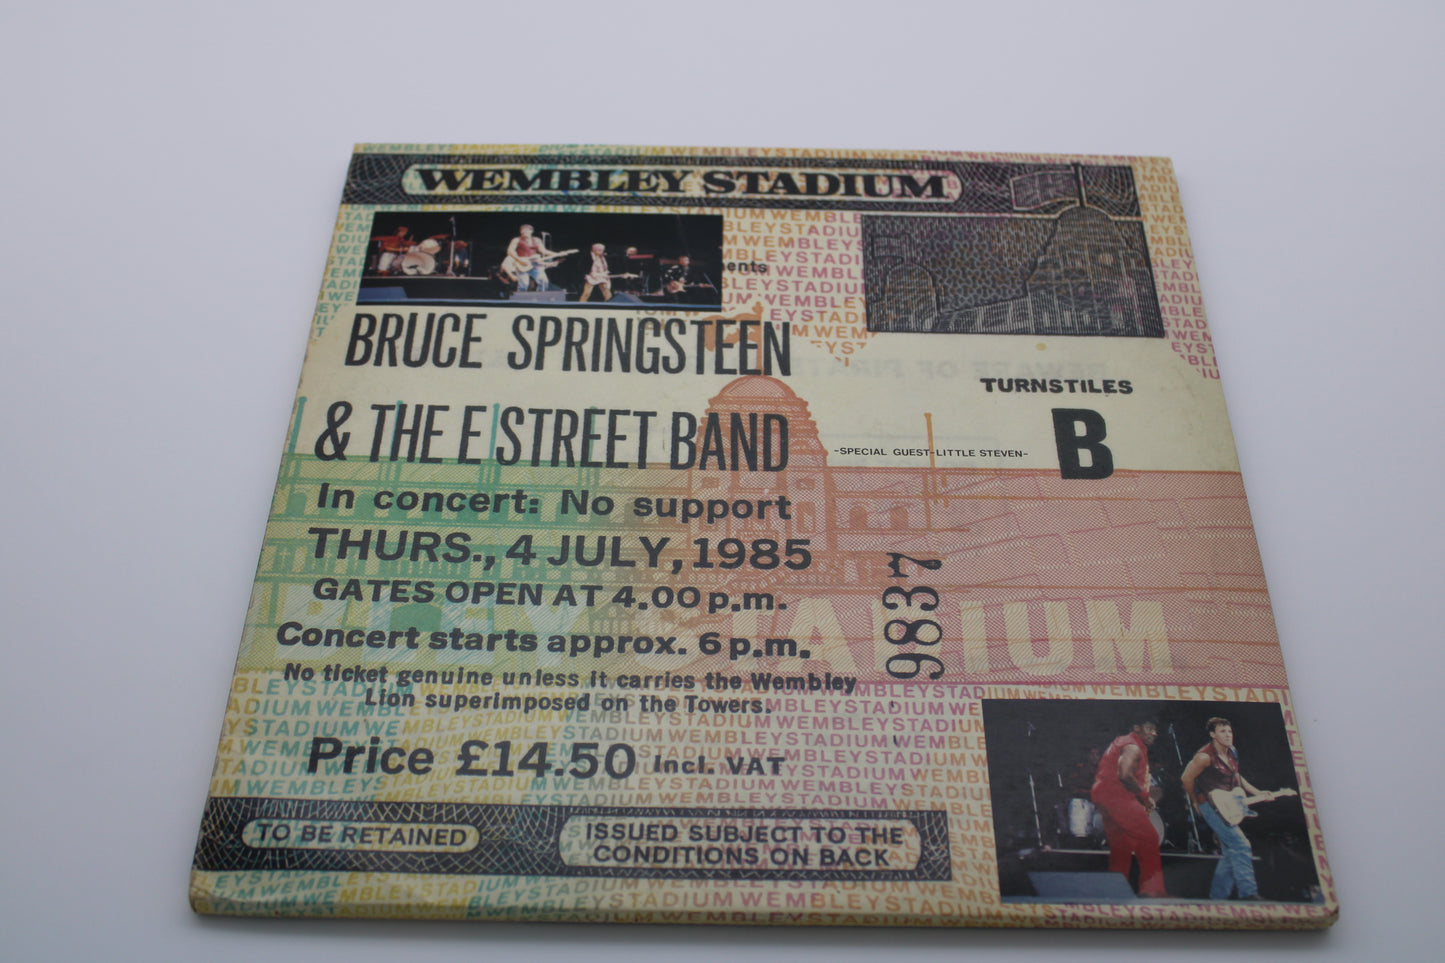 Bruce Springsteen & The E Street Band - Live at Wembley Stadium 4 Vinyl LPs + 7" Collectible 1985 BLV